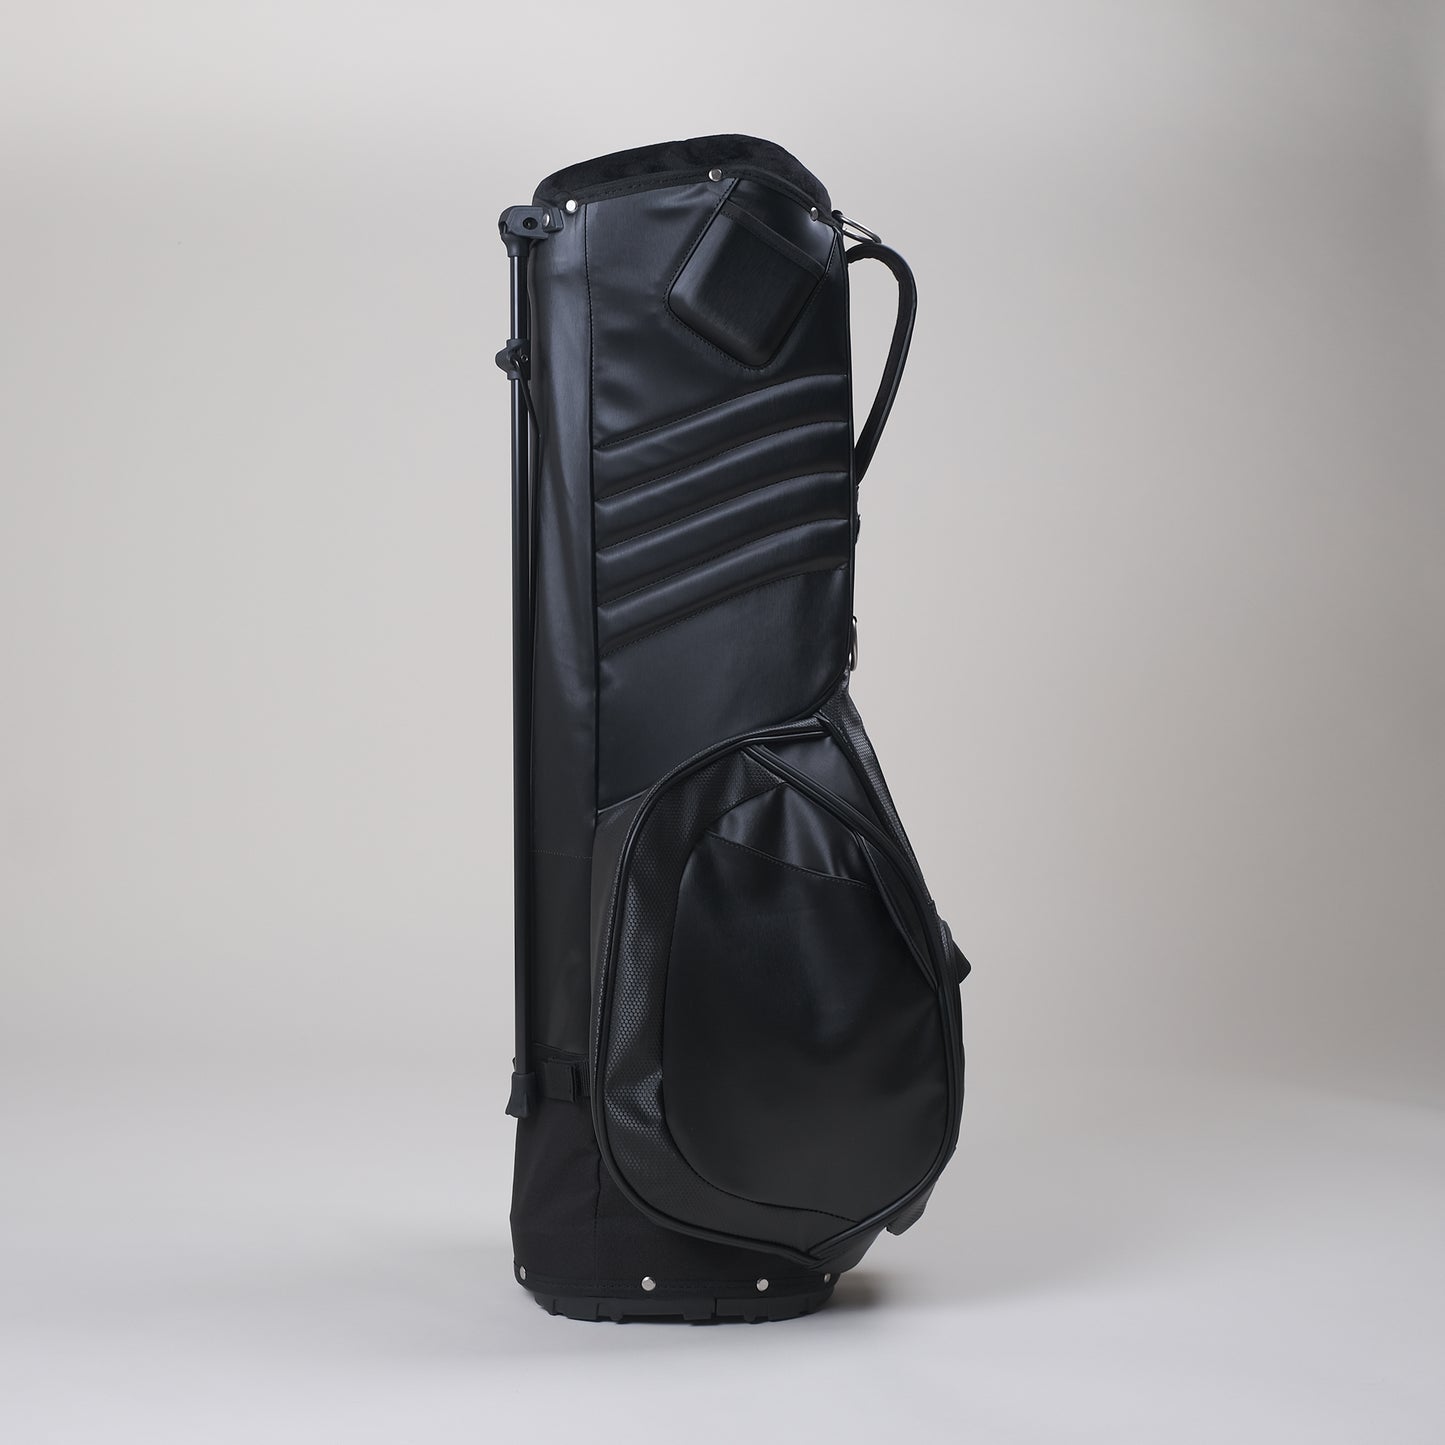 MNML GOLF and Fiori collaborated on an MV2 golf bag  that's built better for the competitive player.